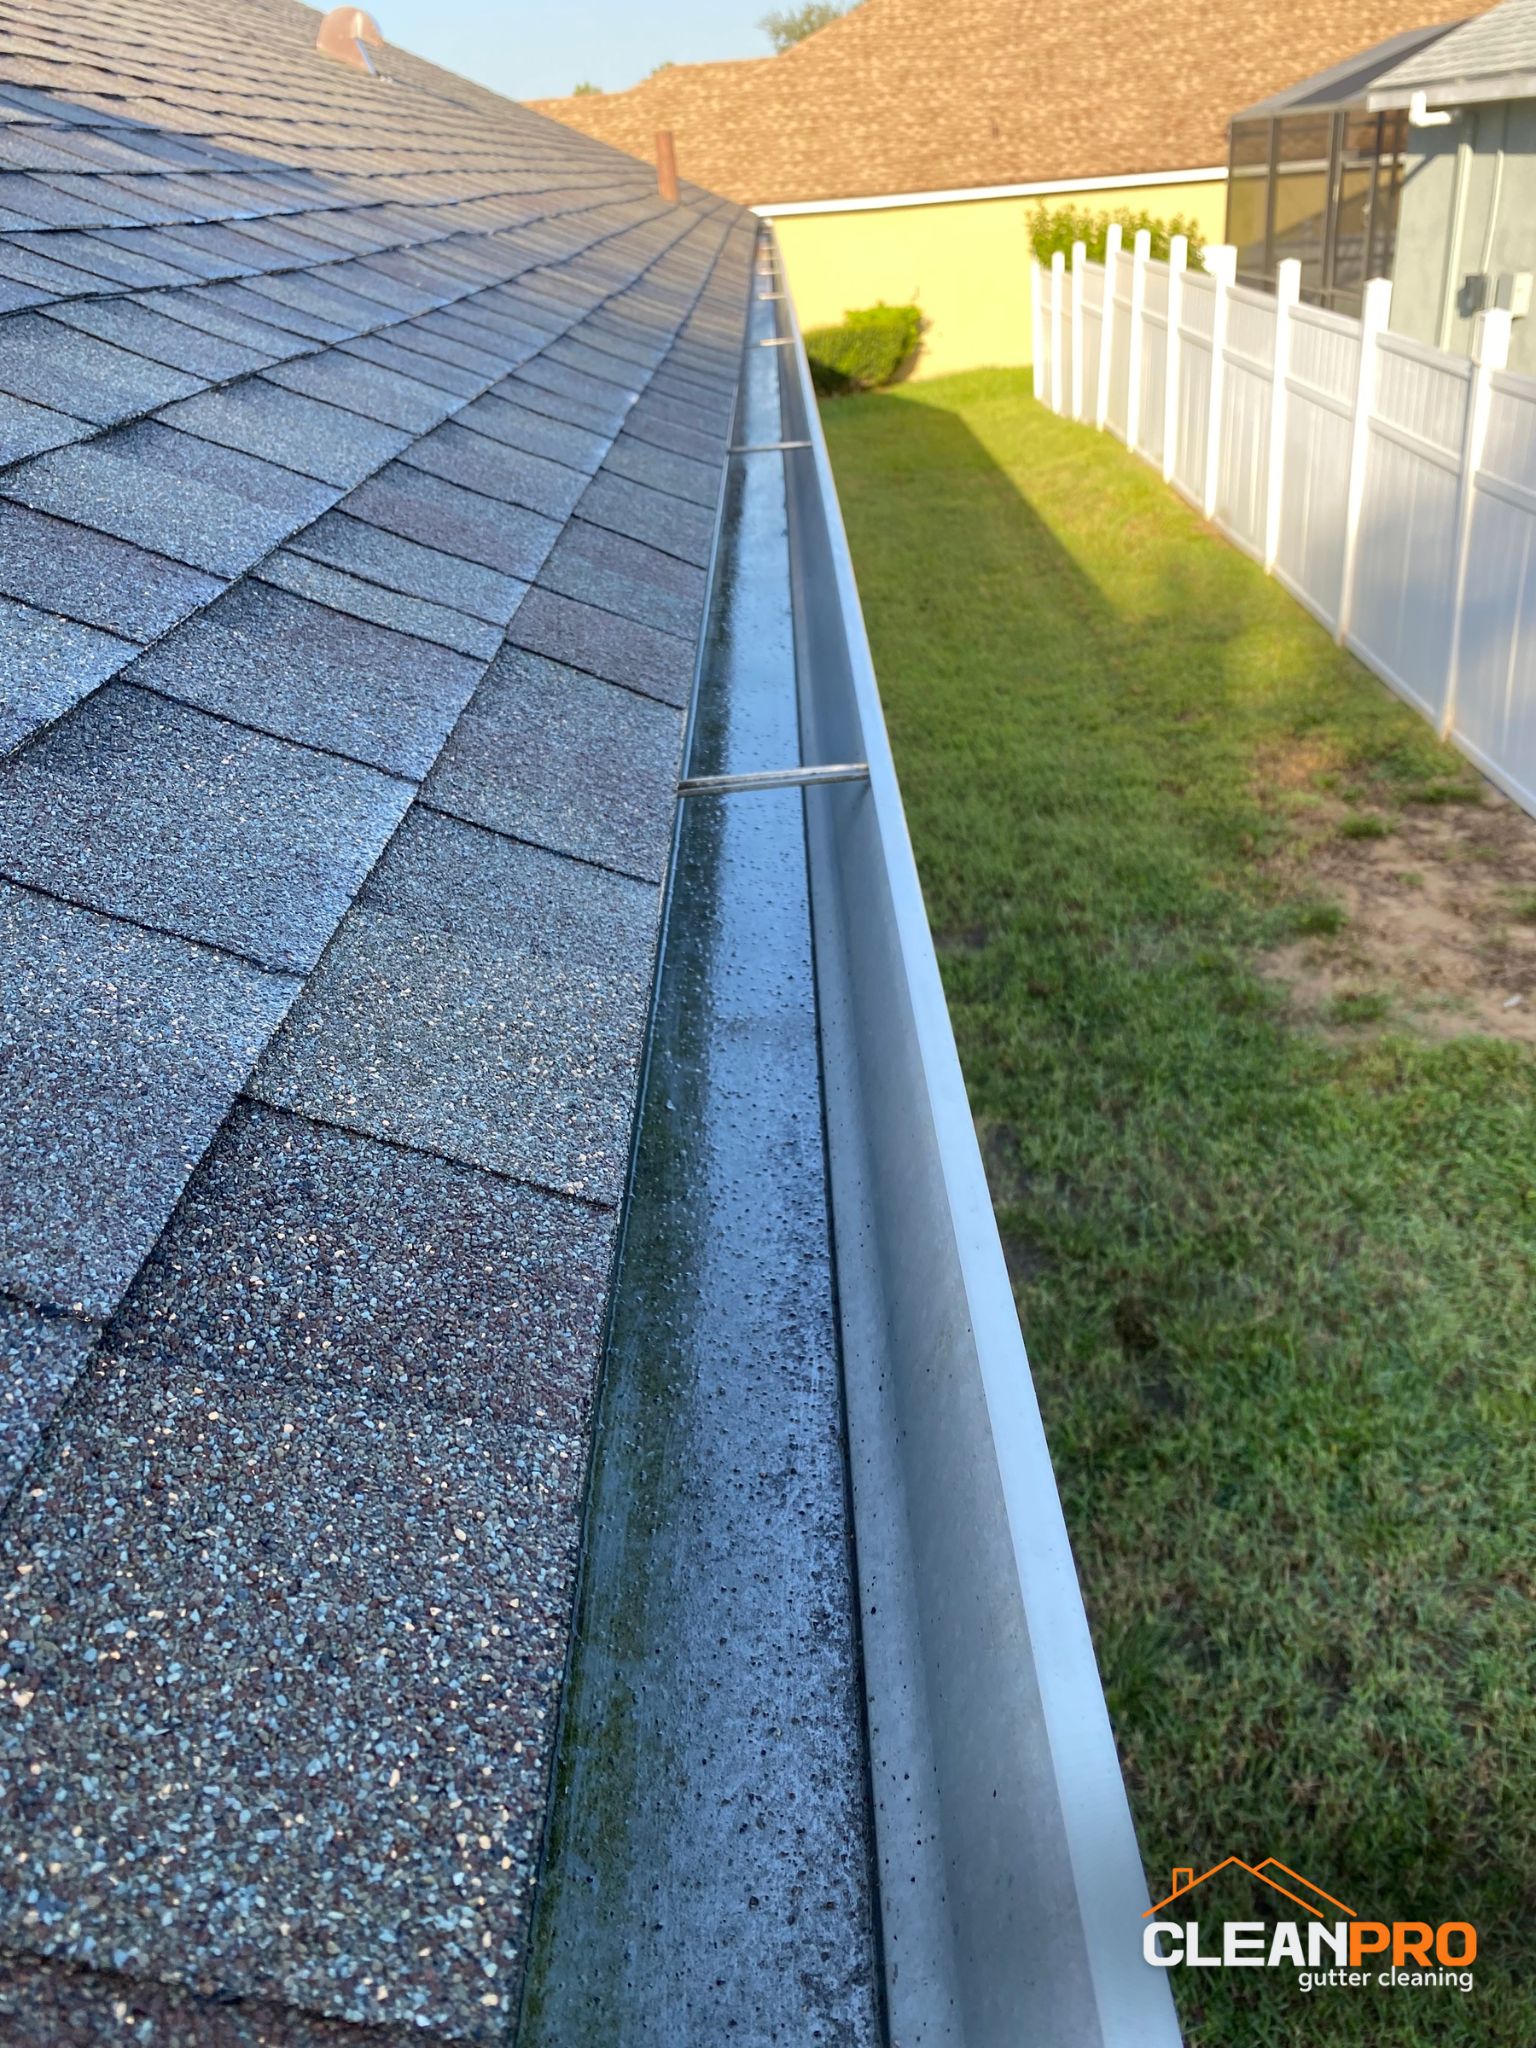 Local Gutter Cleaning in Mountain View